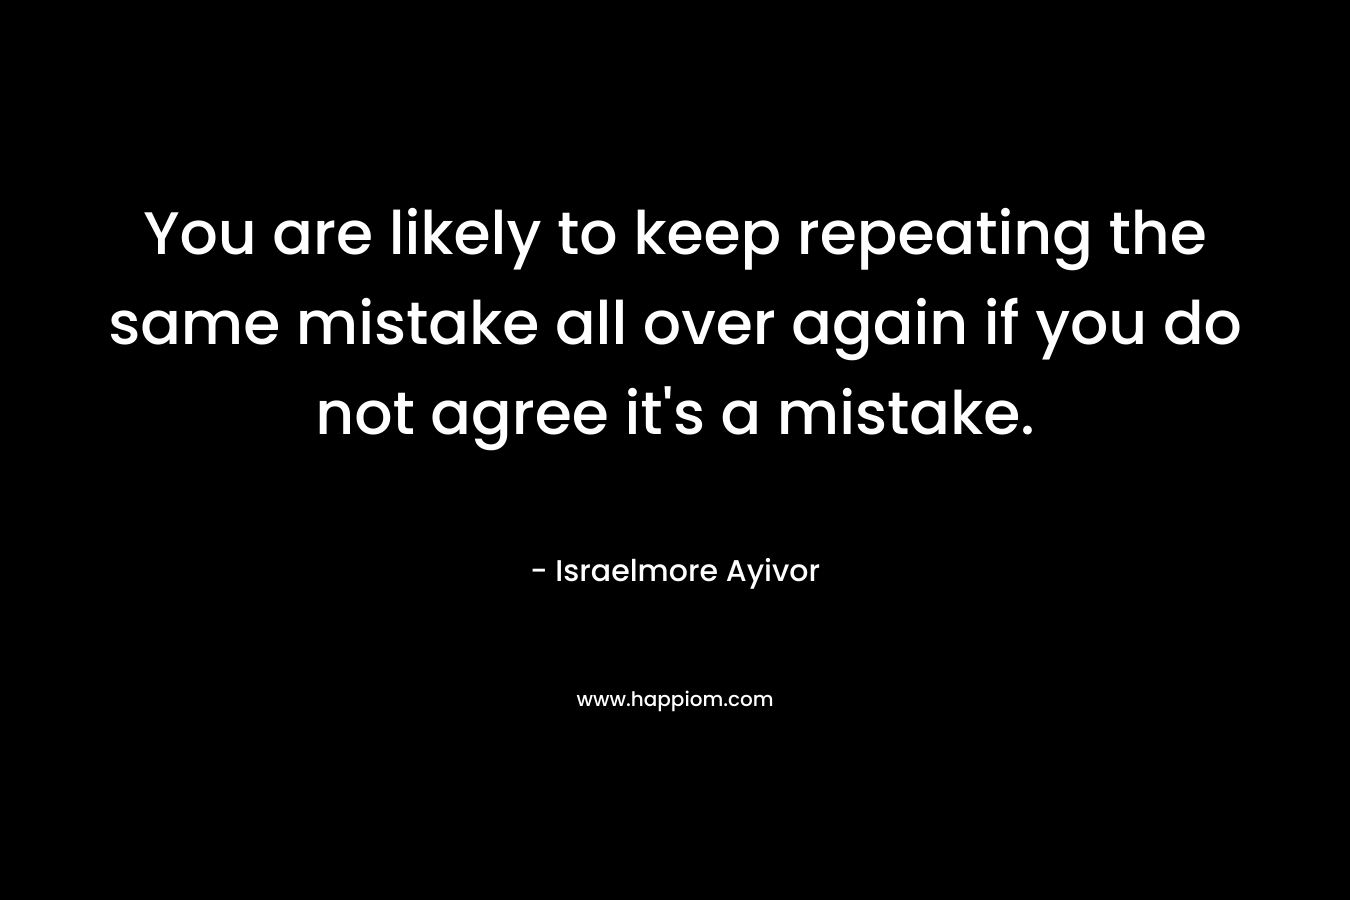 You are likely to keep repeating the same mistake all over again if you do not agree it’s a mistake. – Israelmore Ayivor